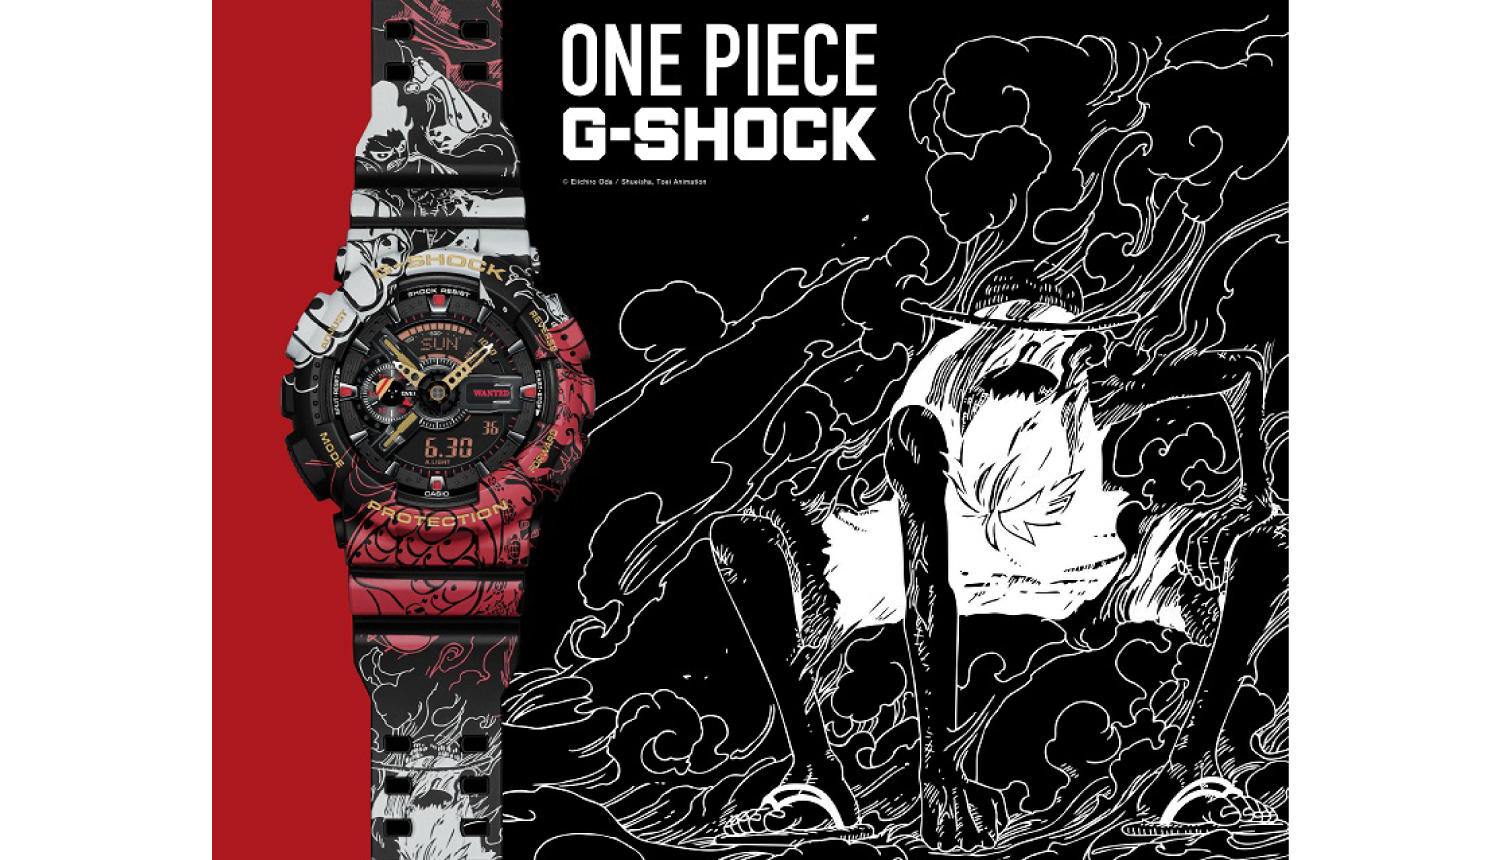 One Piece and Dragon Ball Z Design Watches Released by G-SHOCK